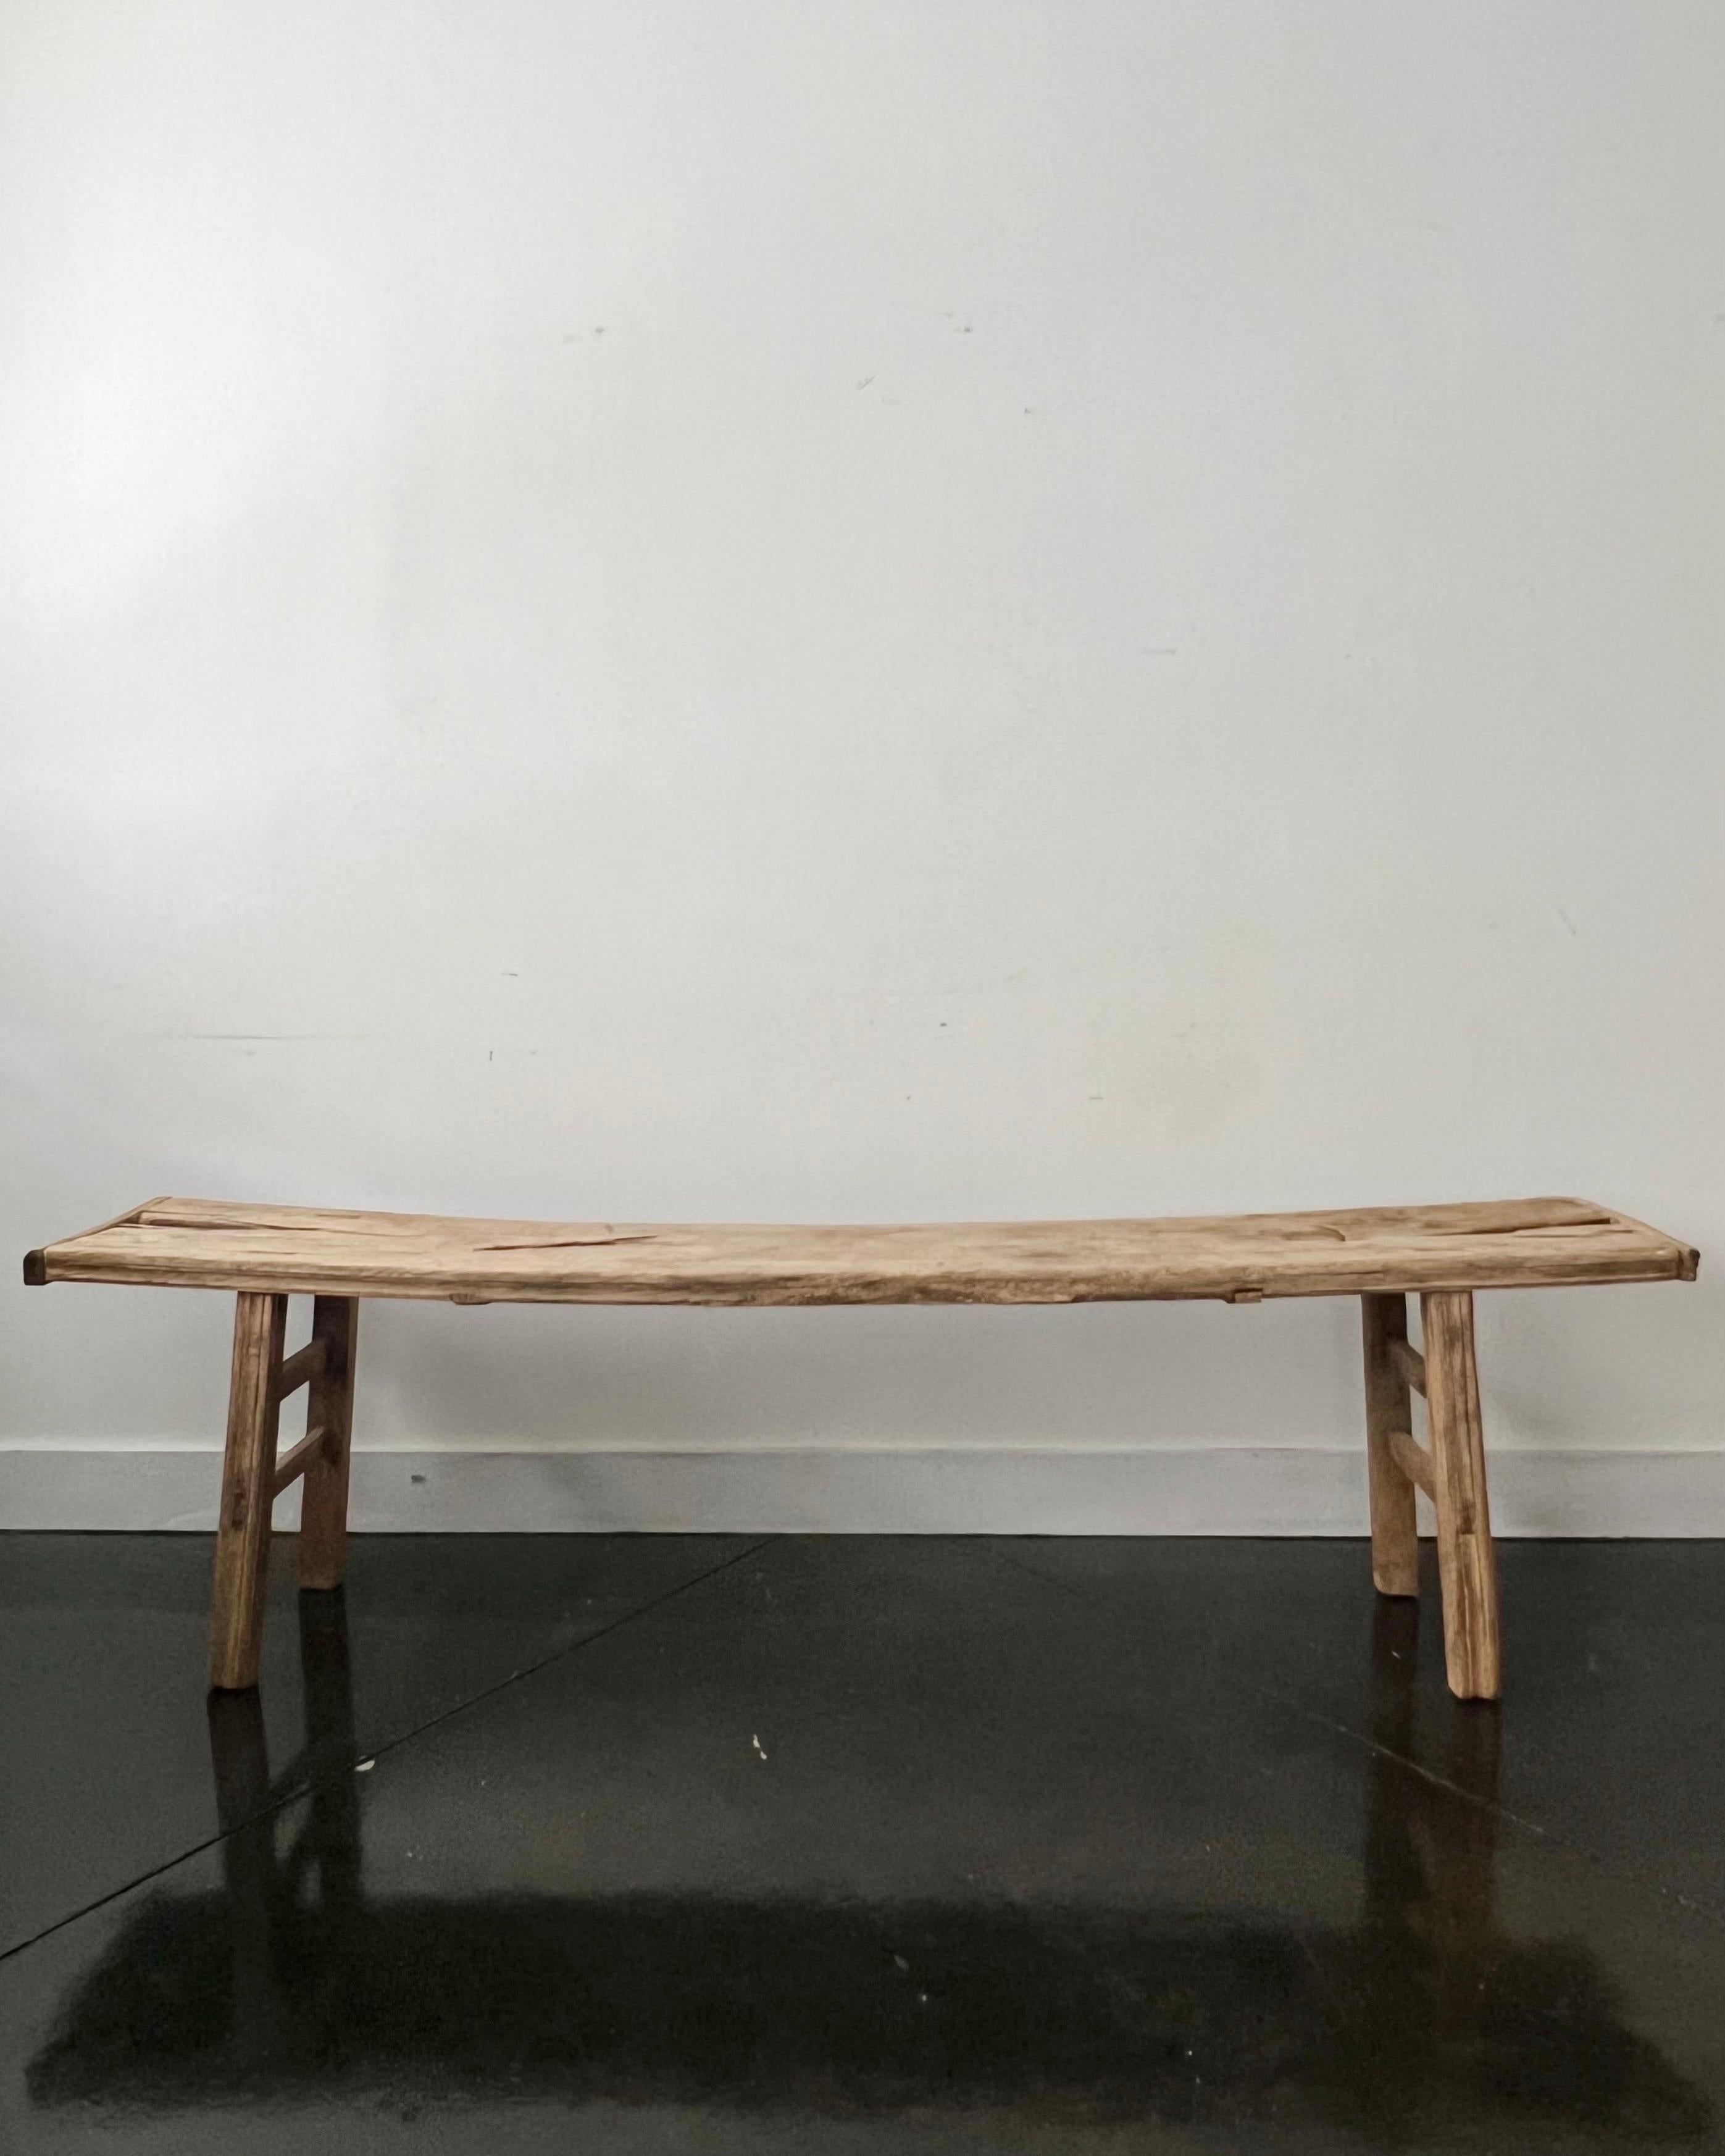 18th century French handmade rare, simple rustic bench/table with wide board weathered top supported by four sturdy legs.
This is a good antique condition with age, small cracks, dings, discoloration and other imperfection.
Please see additional